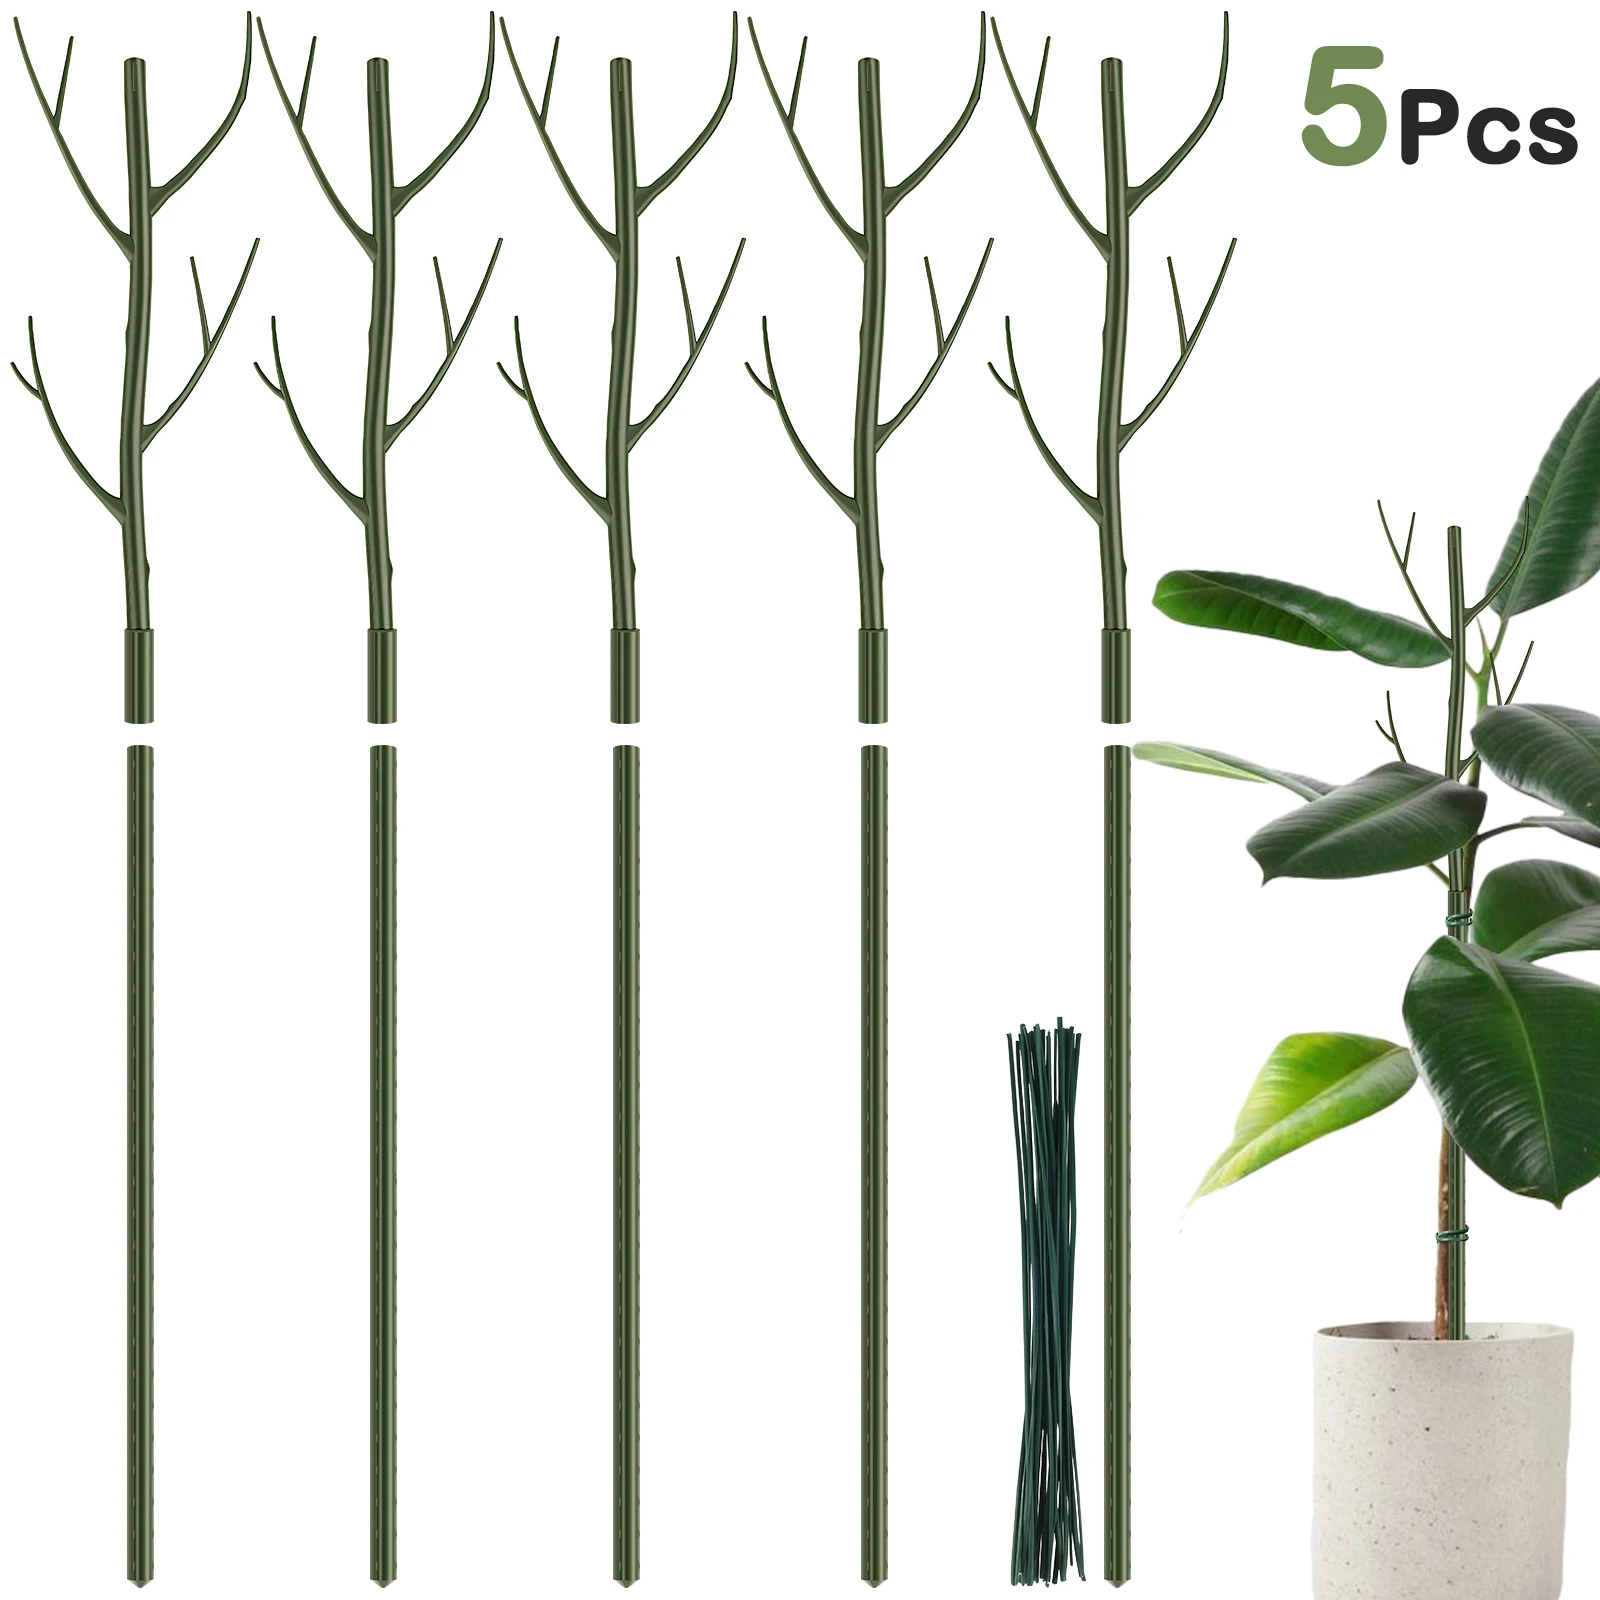 5Pcs Plant Support Stakes Reusable Simulated Tree Branch Plant Stakes Vine Climbing Bracket for Potted Plants Garden Tools